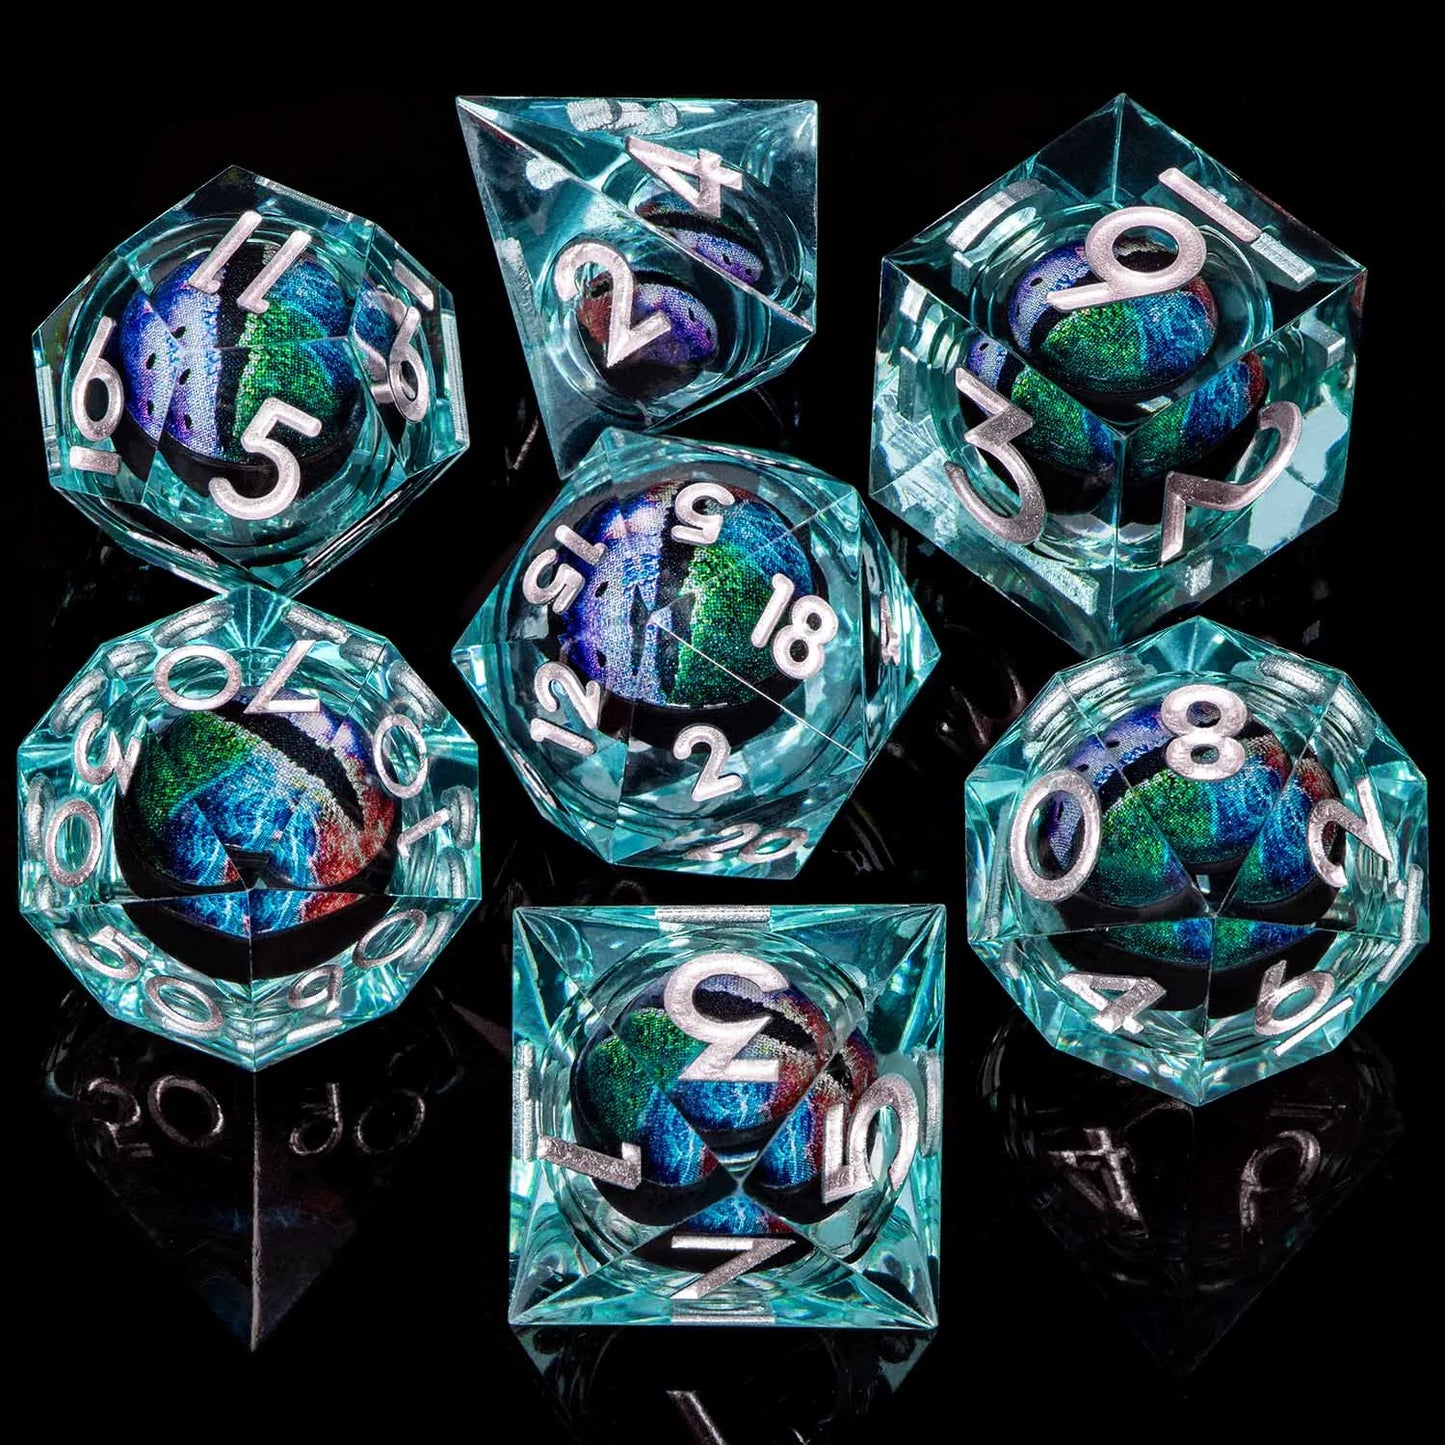 D and D Beholder's Liquid Flow Core Eye Resin Dice Set | Dnd Dungeon and Dragon Pathfinder Role Playing Game Dice | D20 D&D Dice YY-09